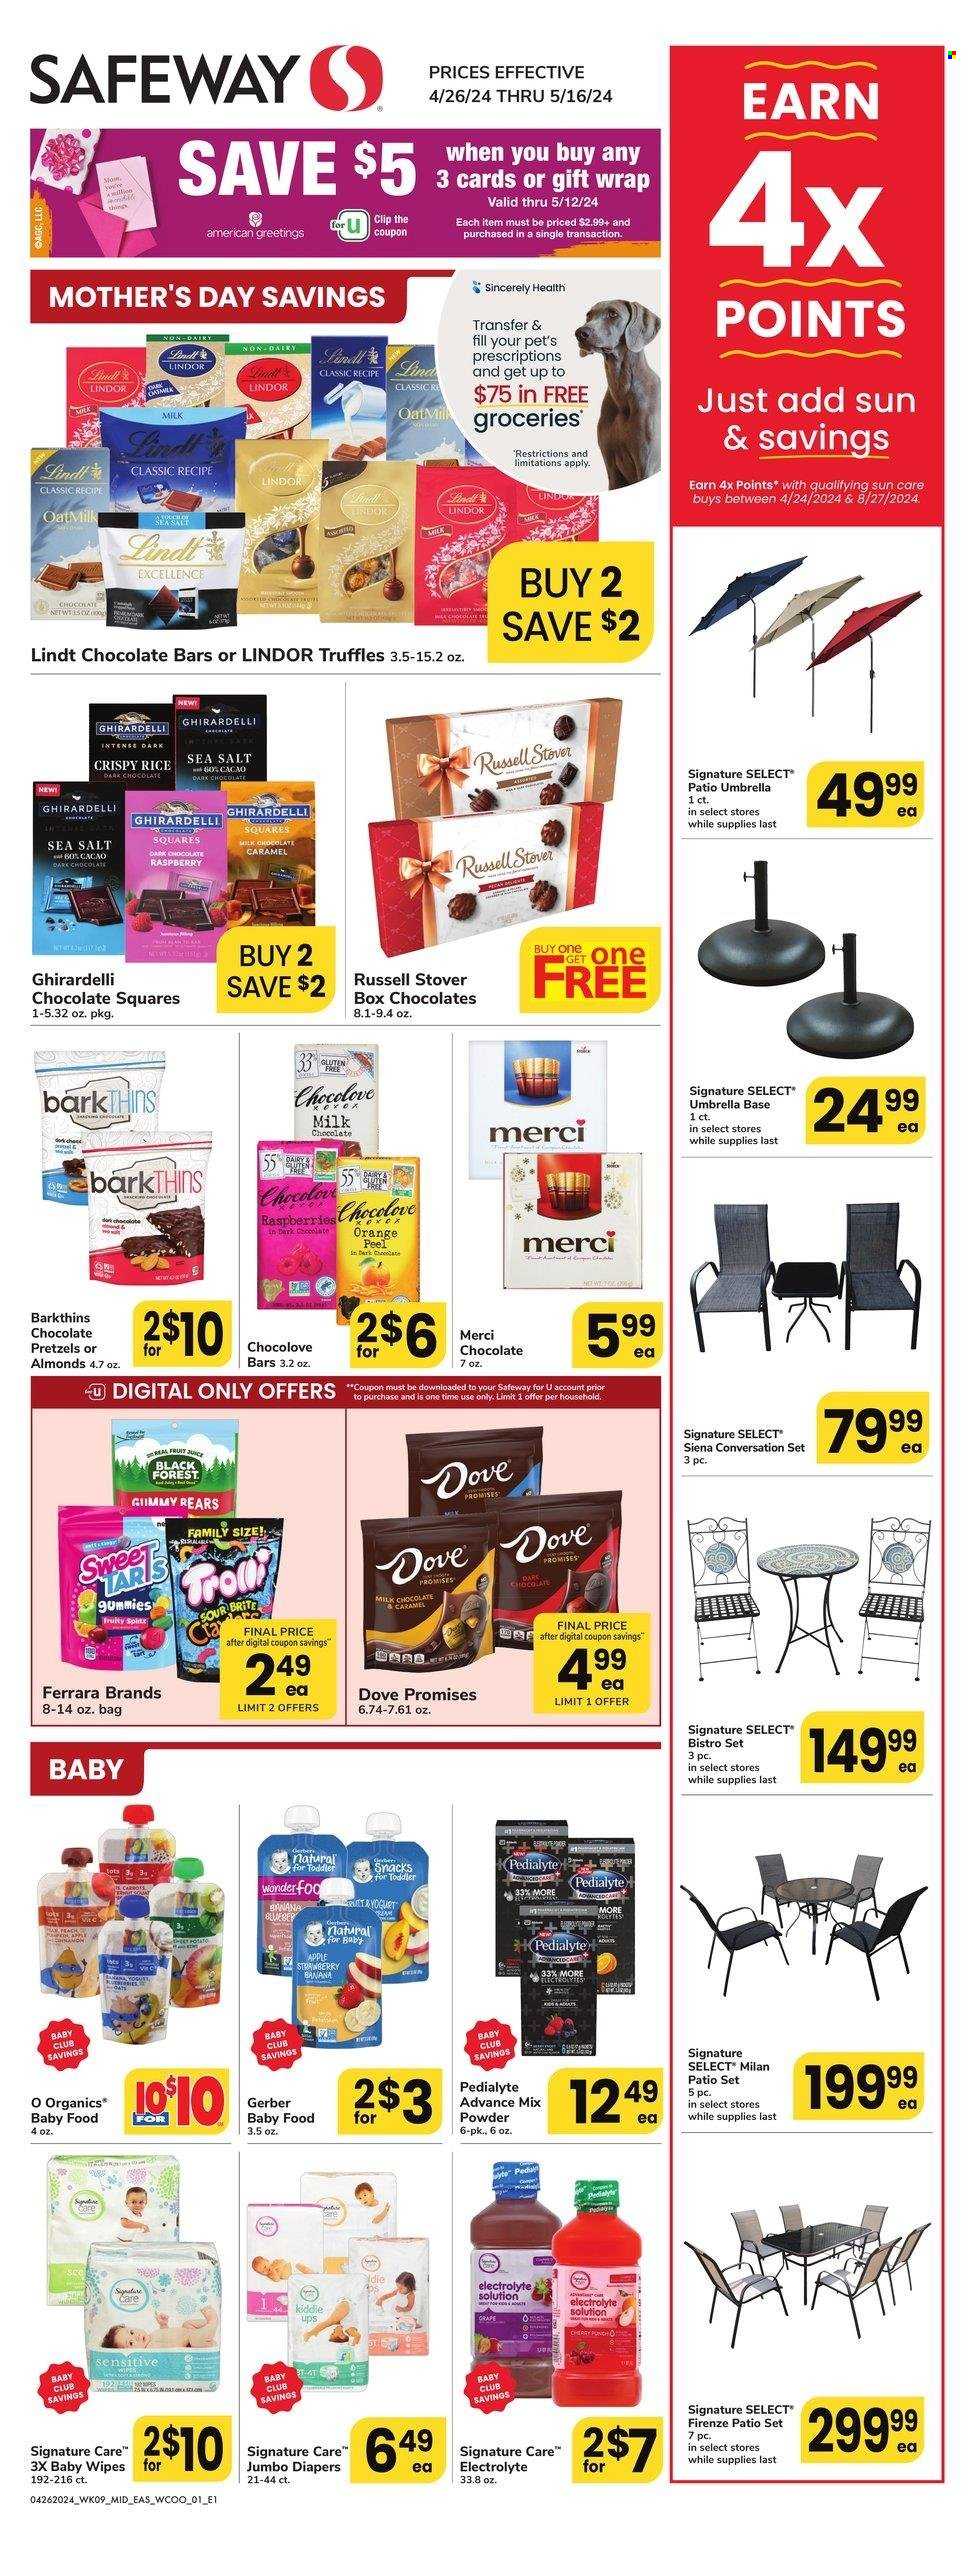 thumbnail - Safeway Flyer - 04/26/2024 - 05/16/2024 - Sales products - pretzels, raspberries, snack, oat milk, Dove, milk chocolate, Lindt, Lindor, truffles, Merci, Ghirardelli, chocolate bar, Dove Promises, bars, gummies, Gerber, sea salt, cereals, caramel, almonds, Pedialyte, baby snack, wipes, sun care, gift wrap, dietary supplement. Page 1.